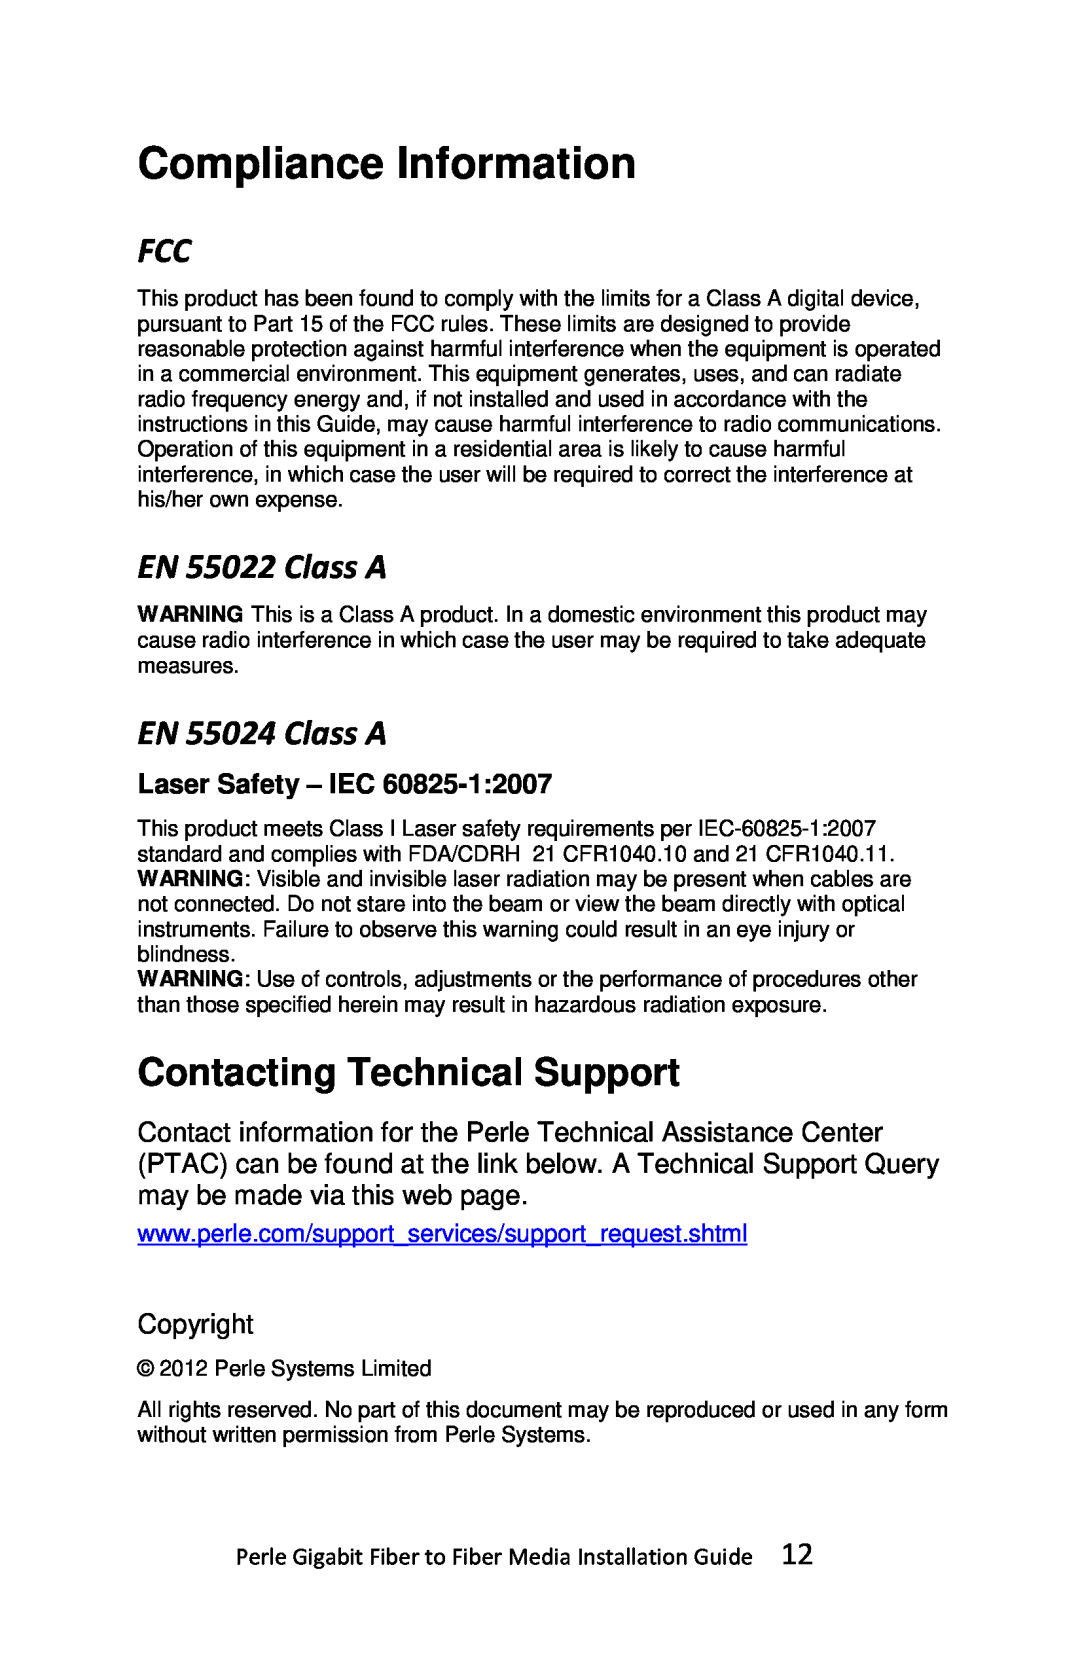 Perle Systems S-1000MM-XXXXXX Compliance Information, Contacting Technical Support, Laser Safety - IEC, EN 55022 Class A 